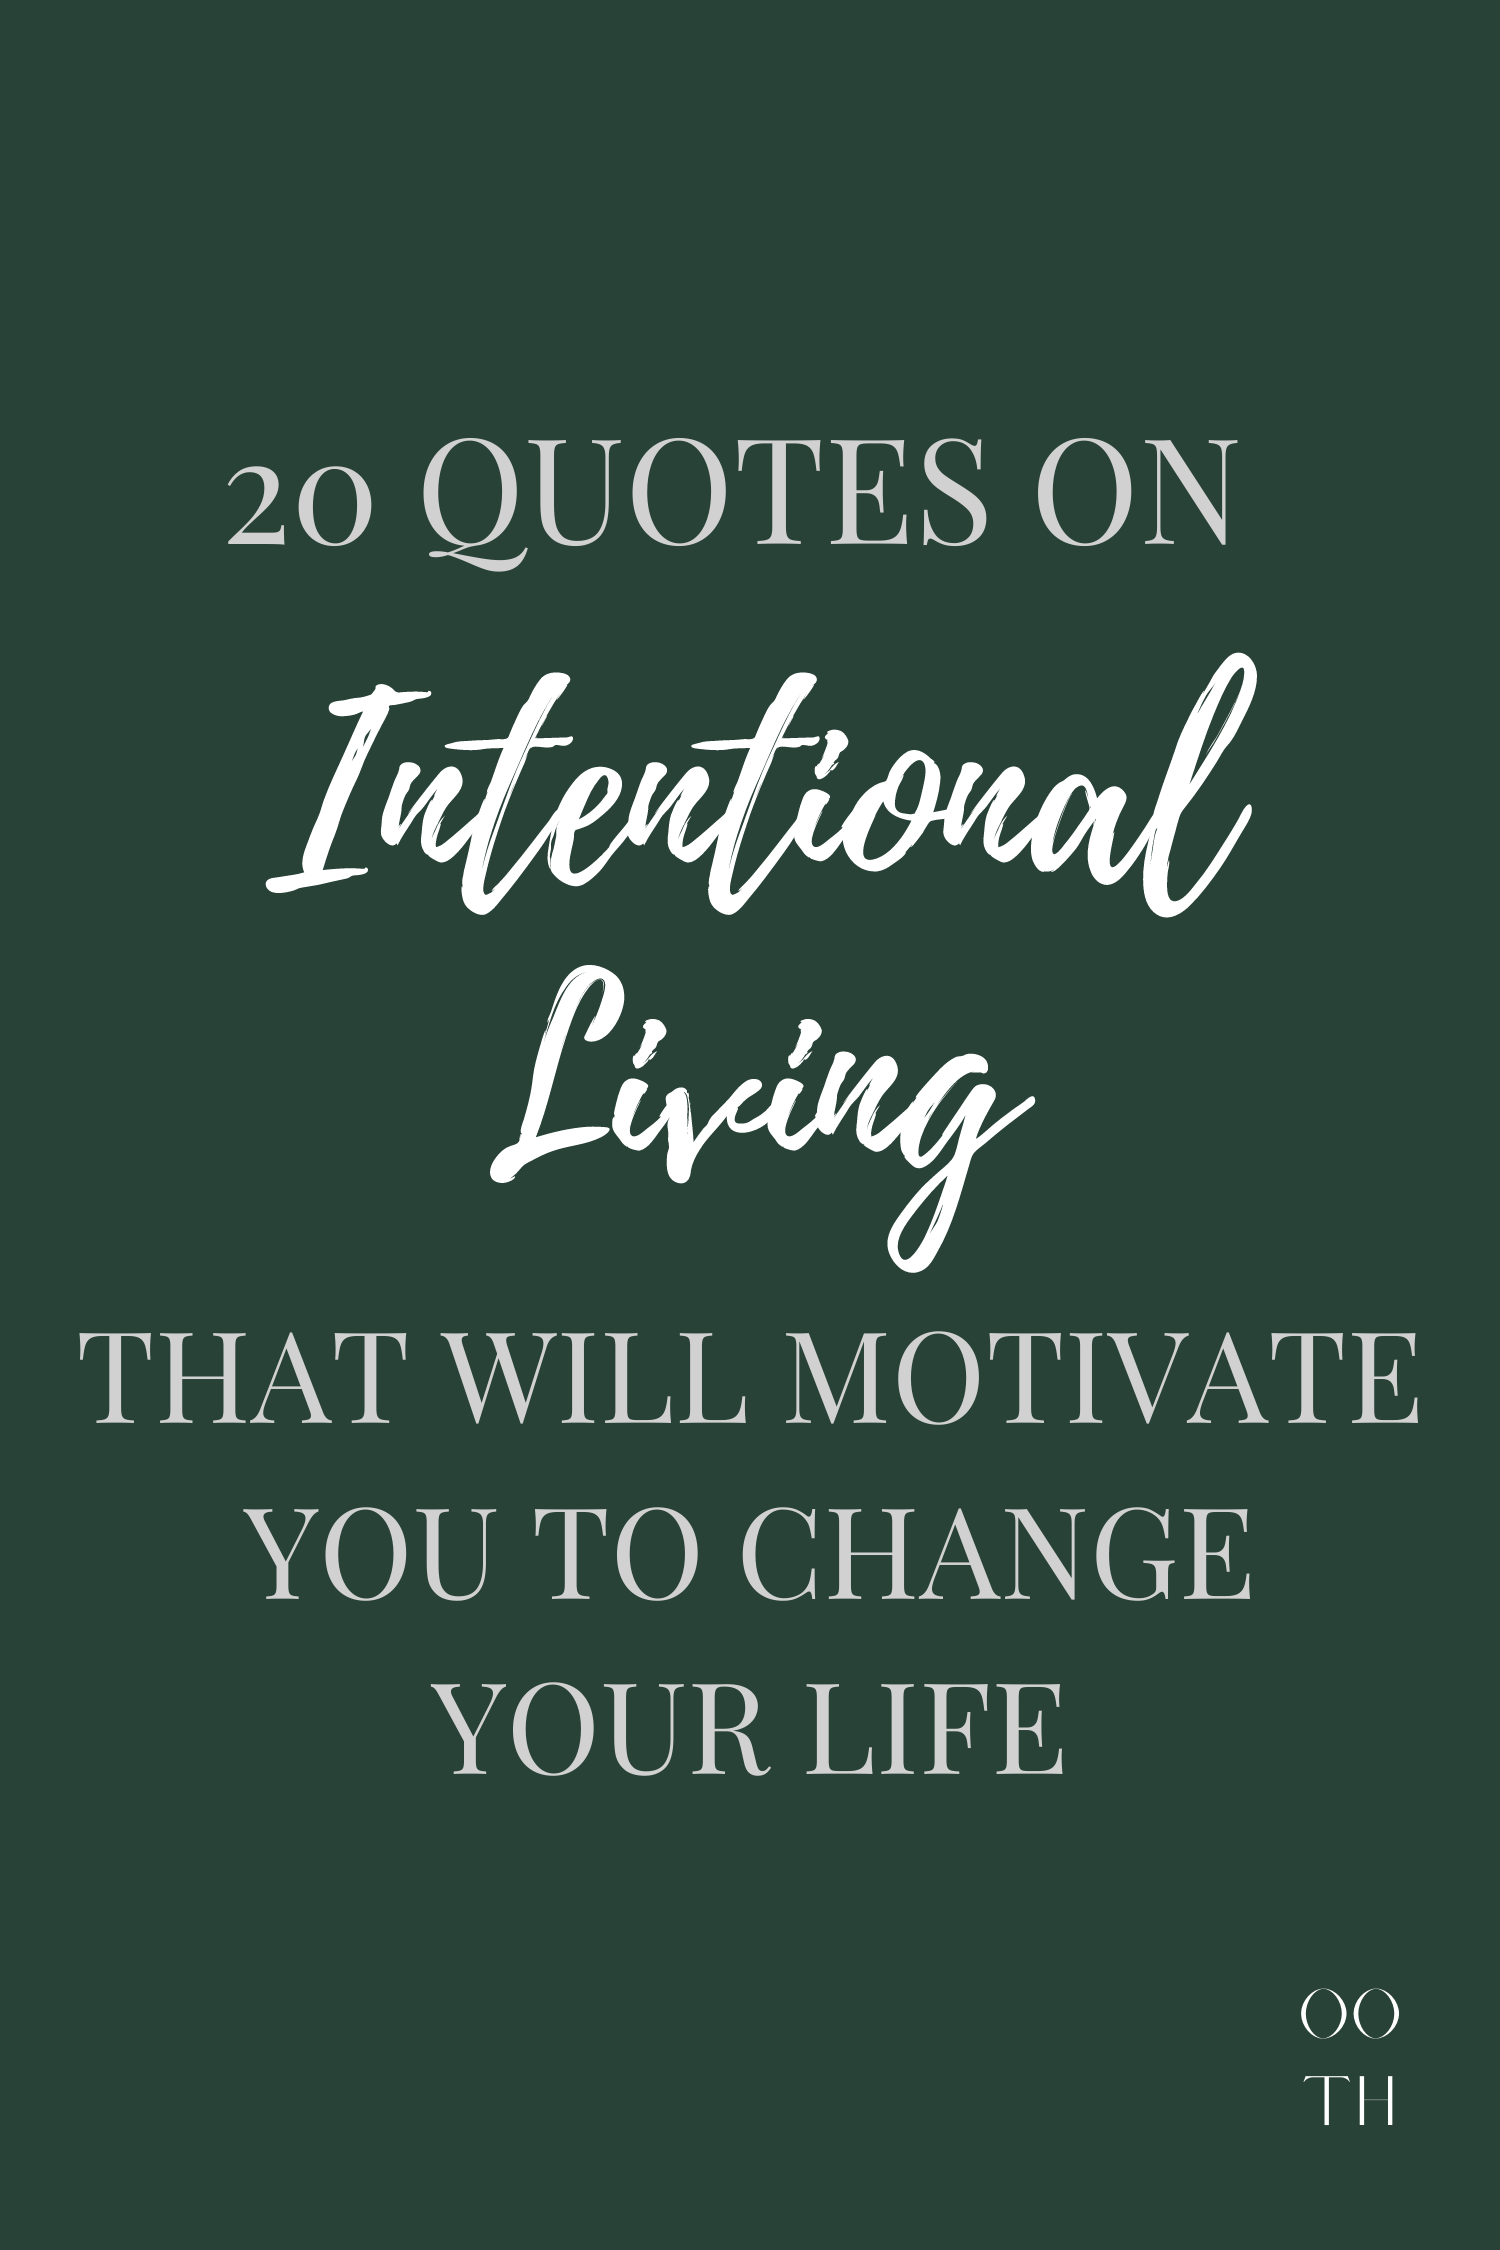 20 Intentional Living Quotes that Will Change Your Life out of the habit